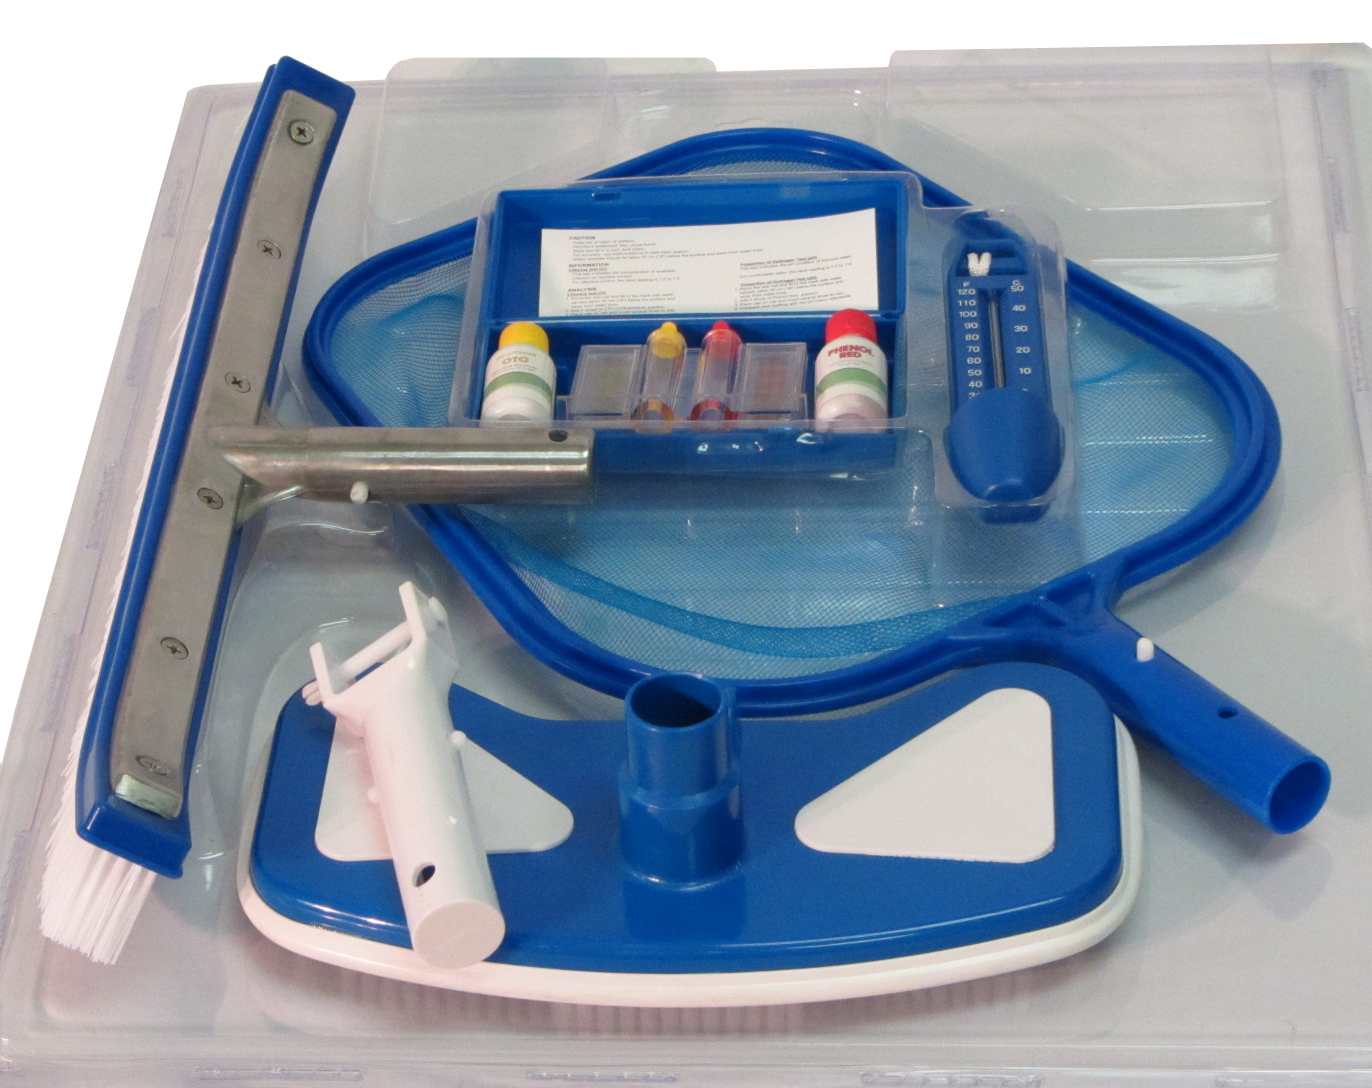  Above Ground Swimming Pool Maintenance Kit for Large Space